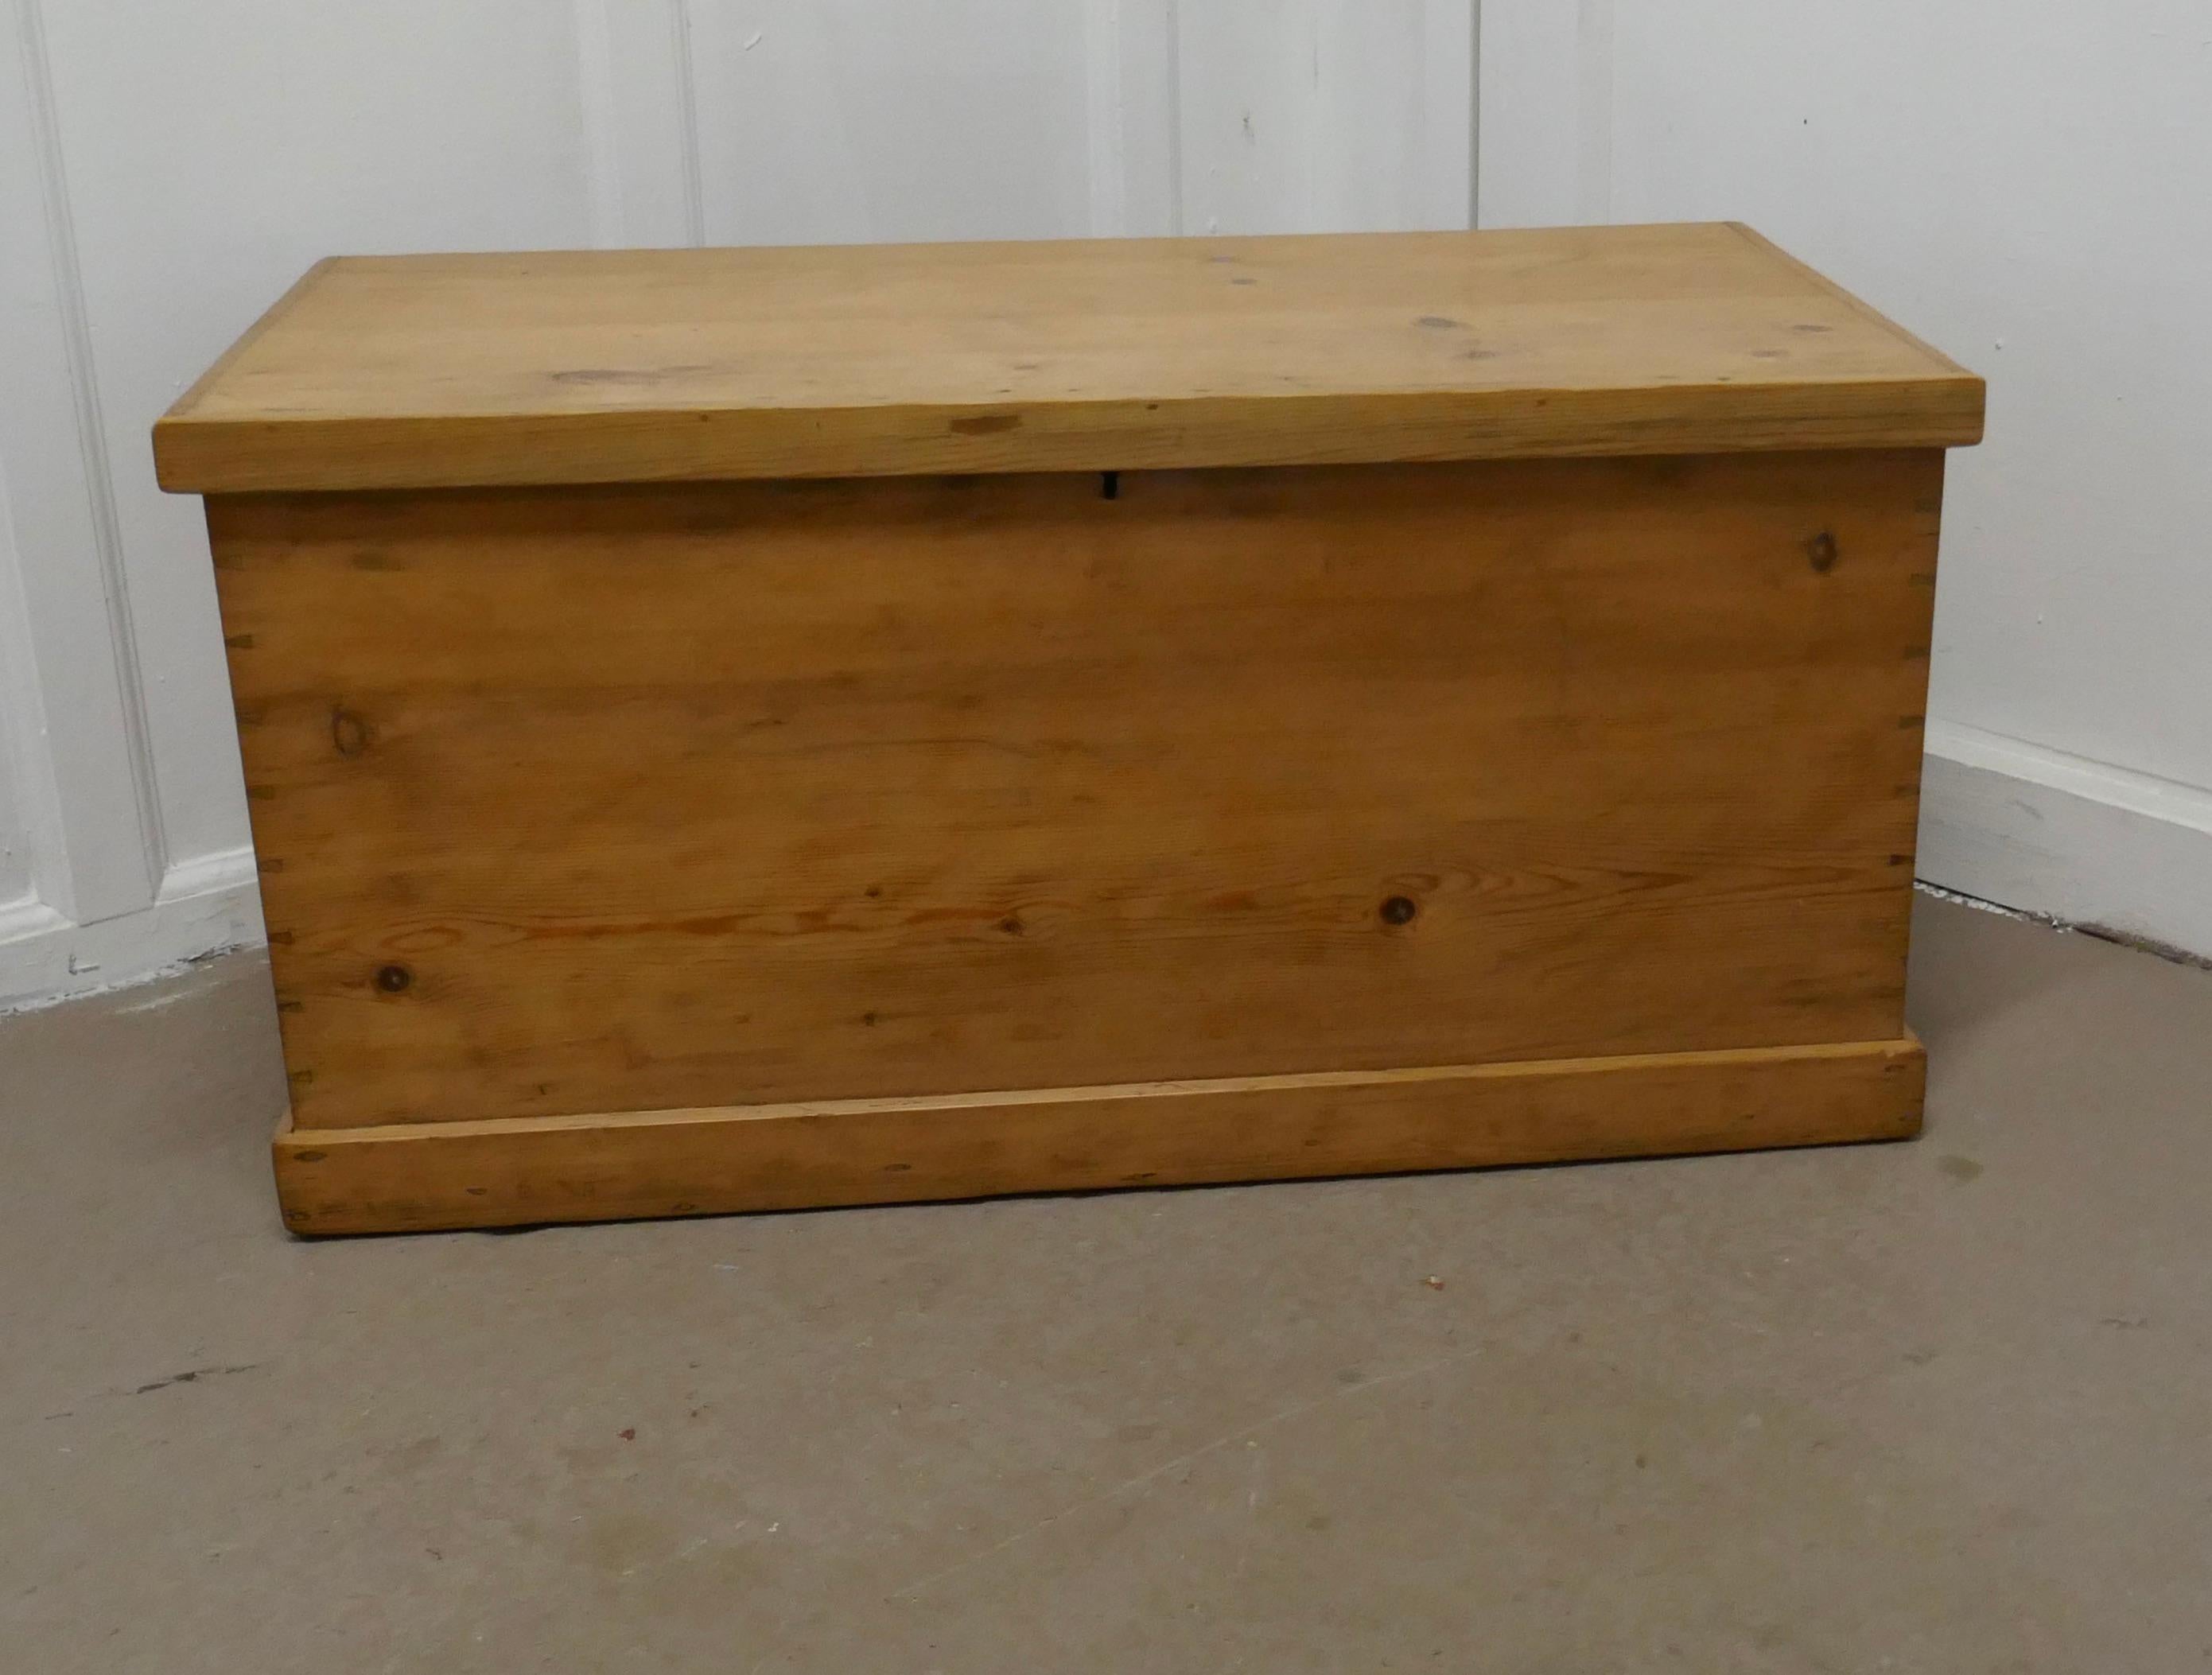 Country Victorian Pine Blanket Box, Coffee Table or Shoe Tidy